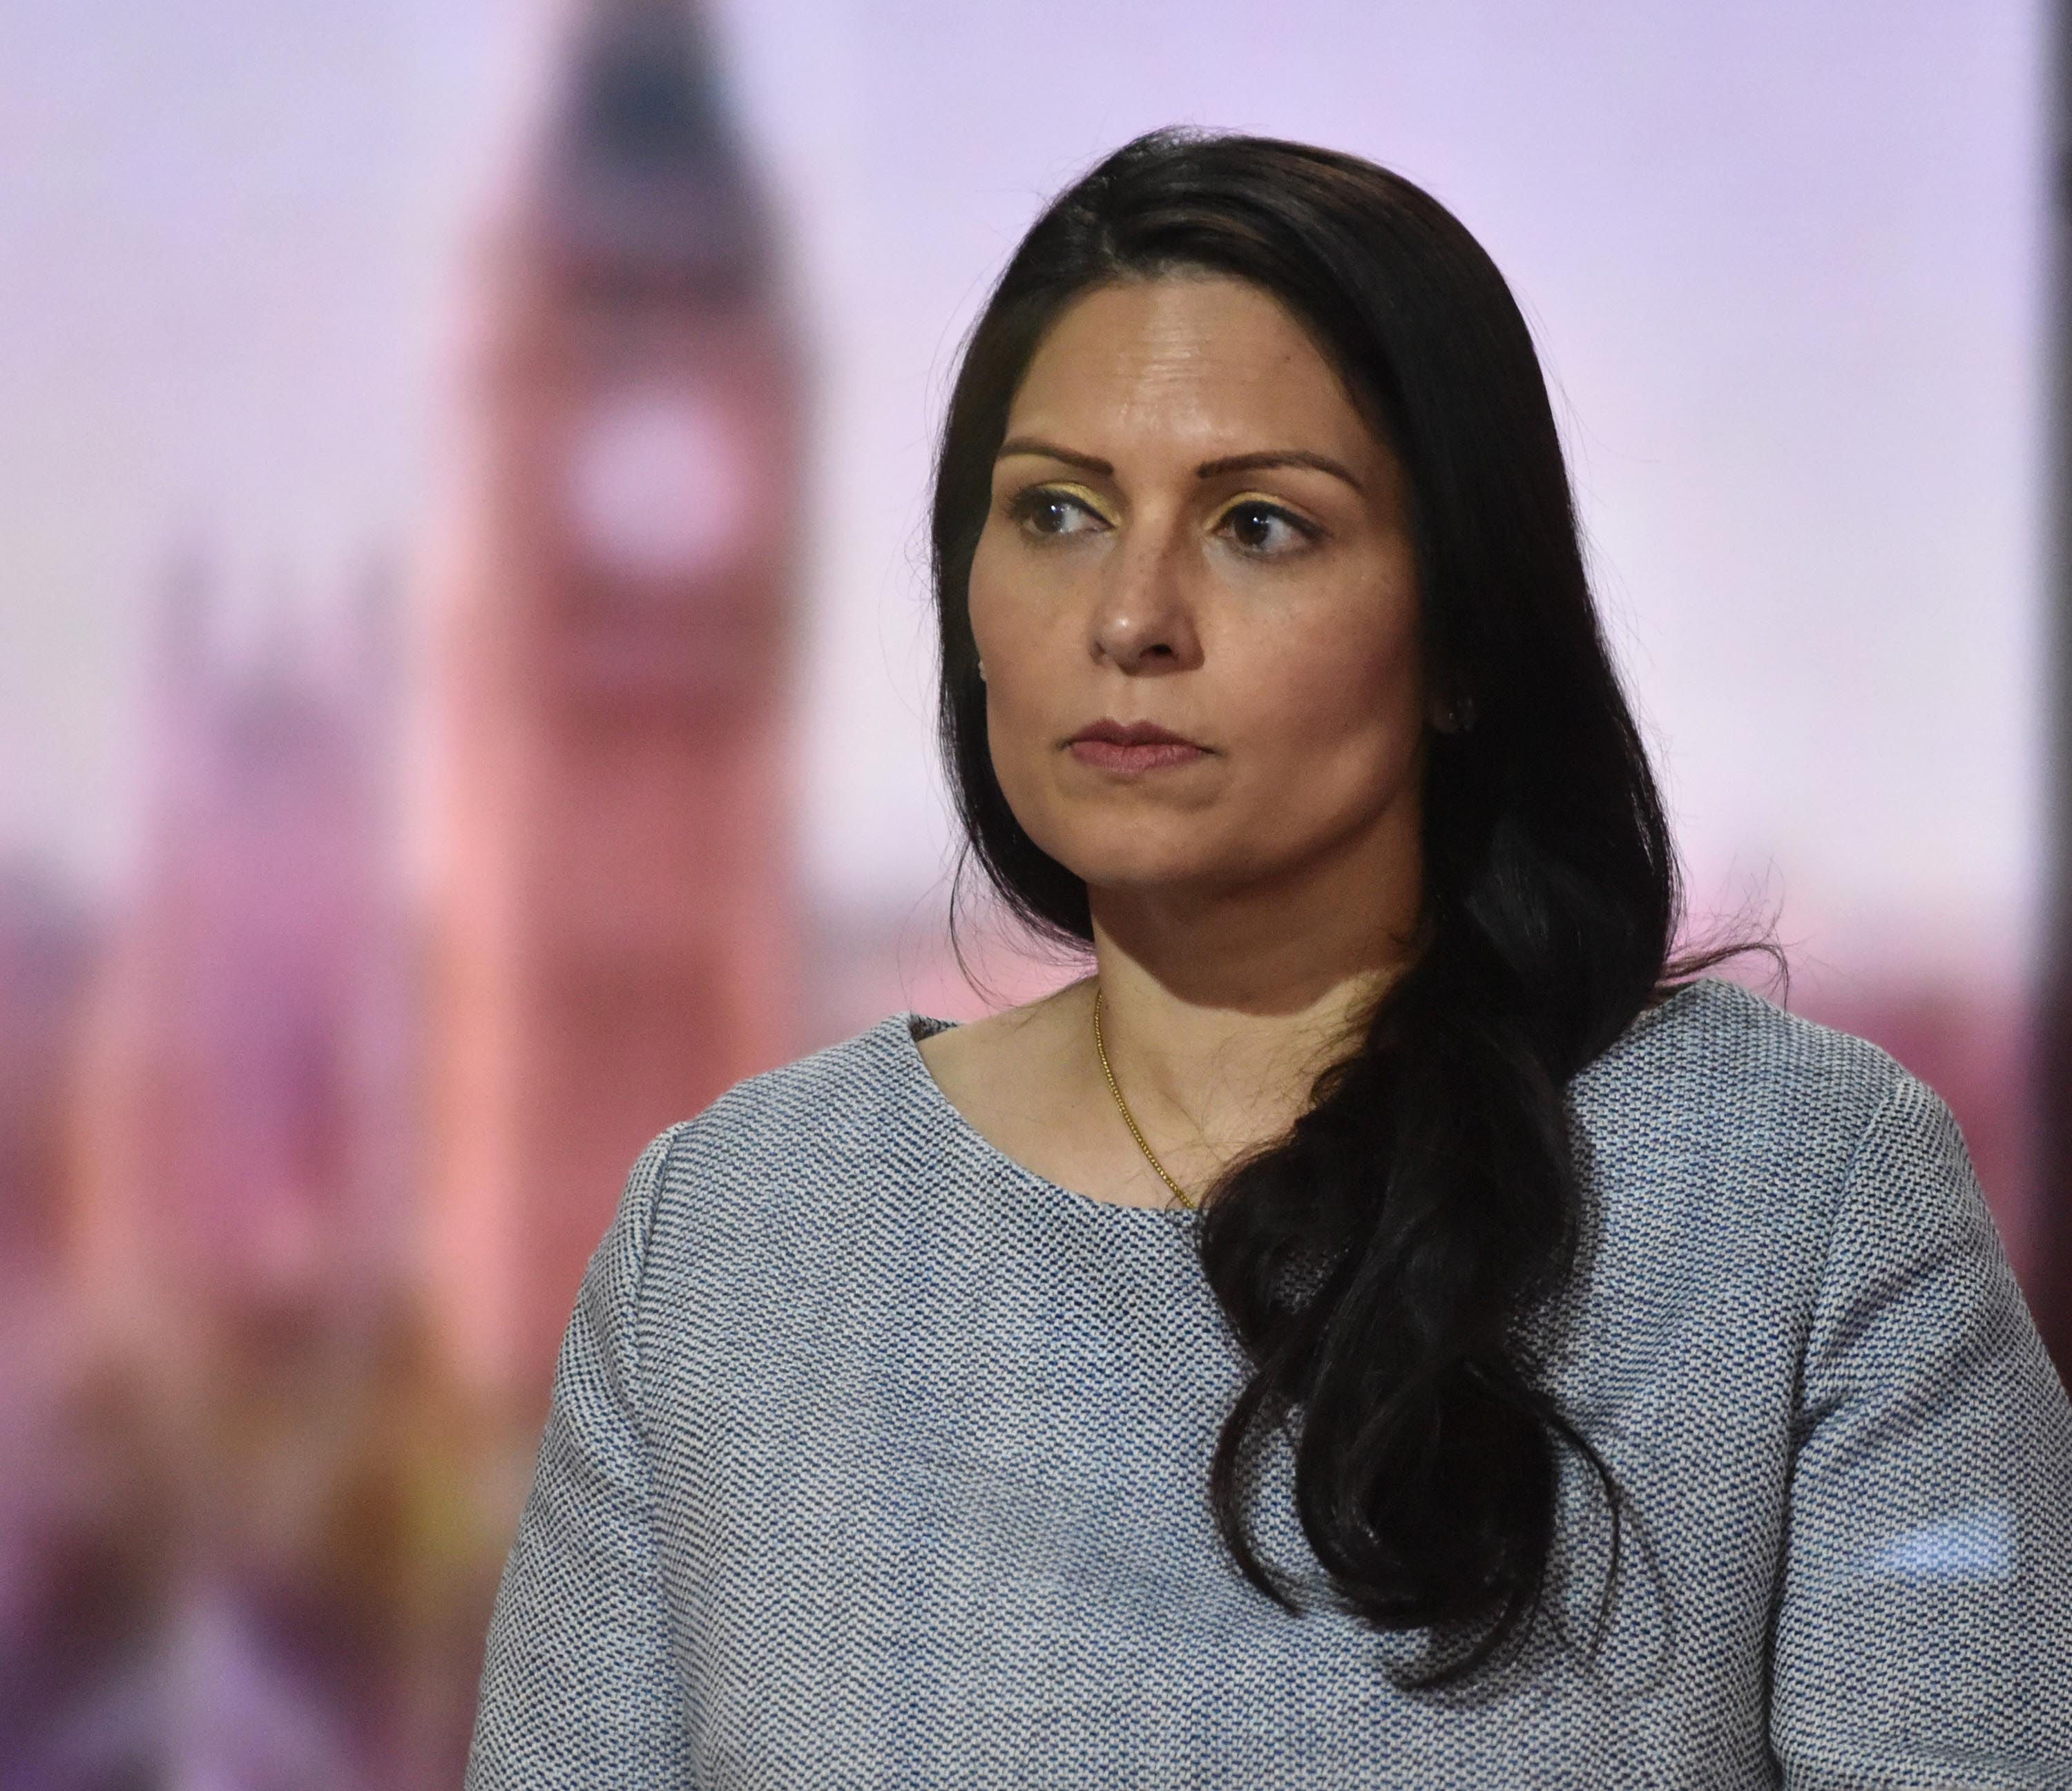 A racist video targeting Home Secretary Priti Patel was allegedly posted to social media in January this year